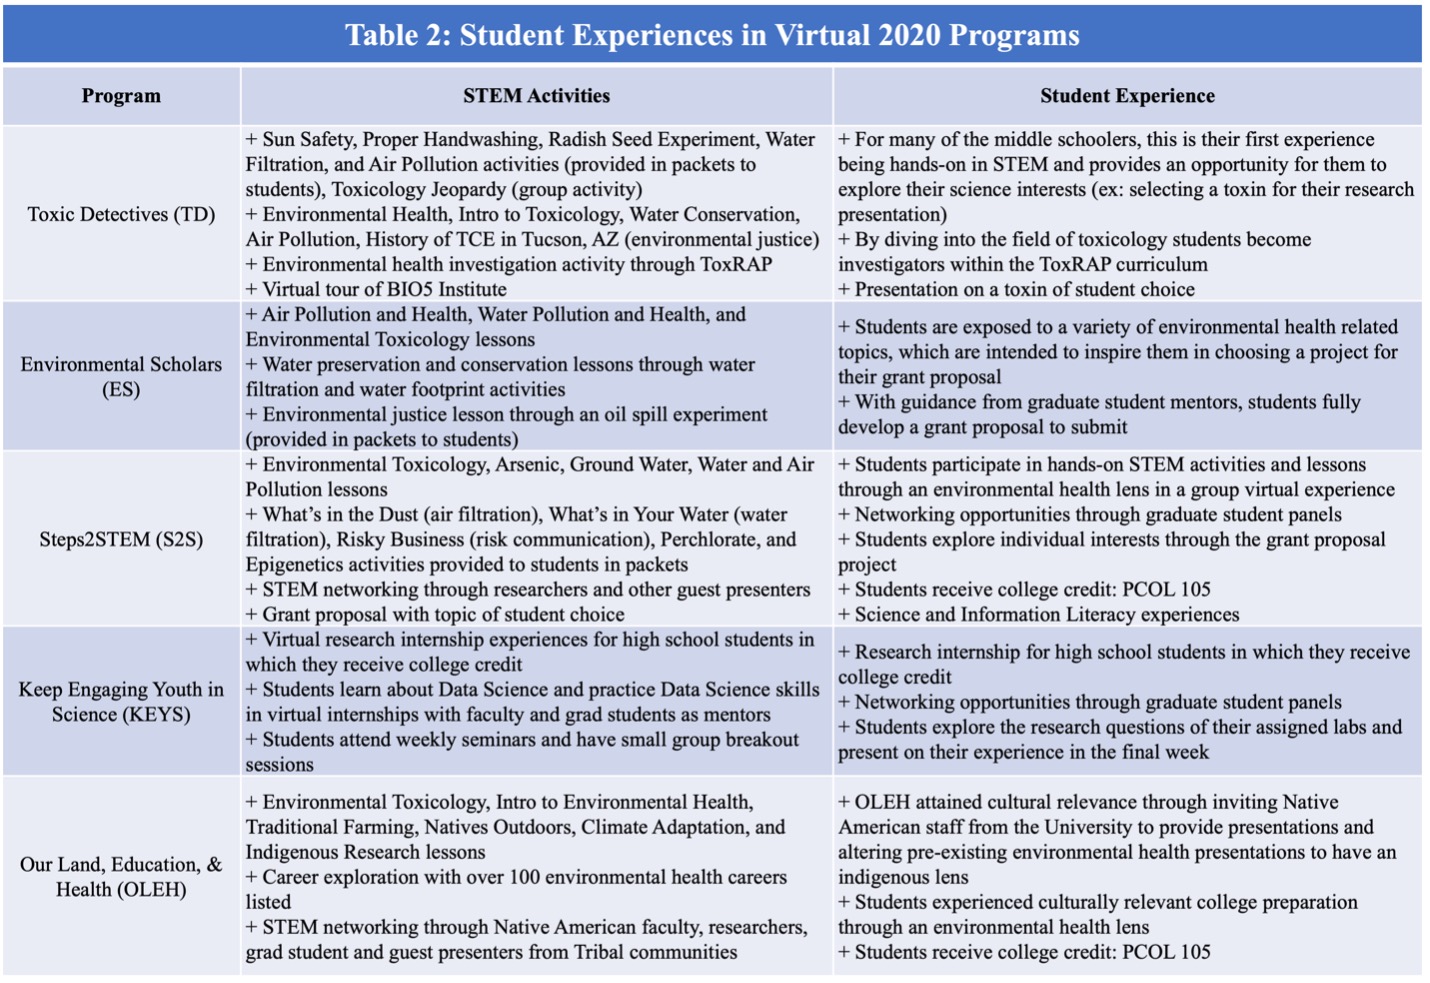 Student experiences in virtual 2020 programs identifies the specific STEM lessons and experiences for each program